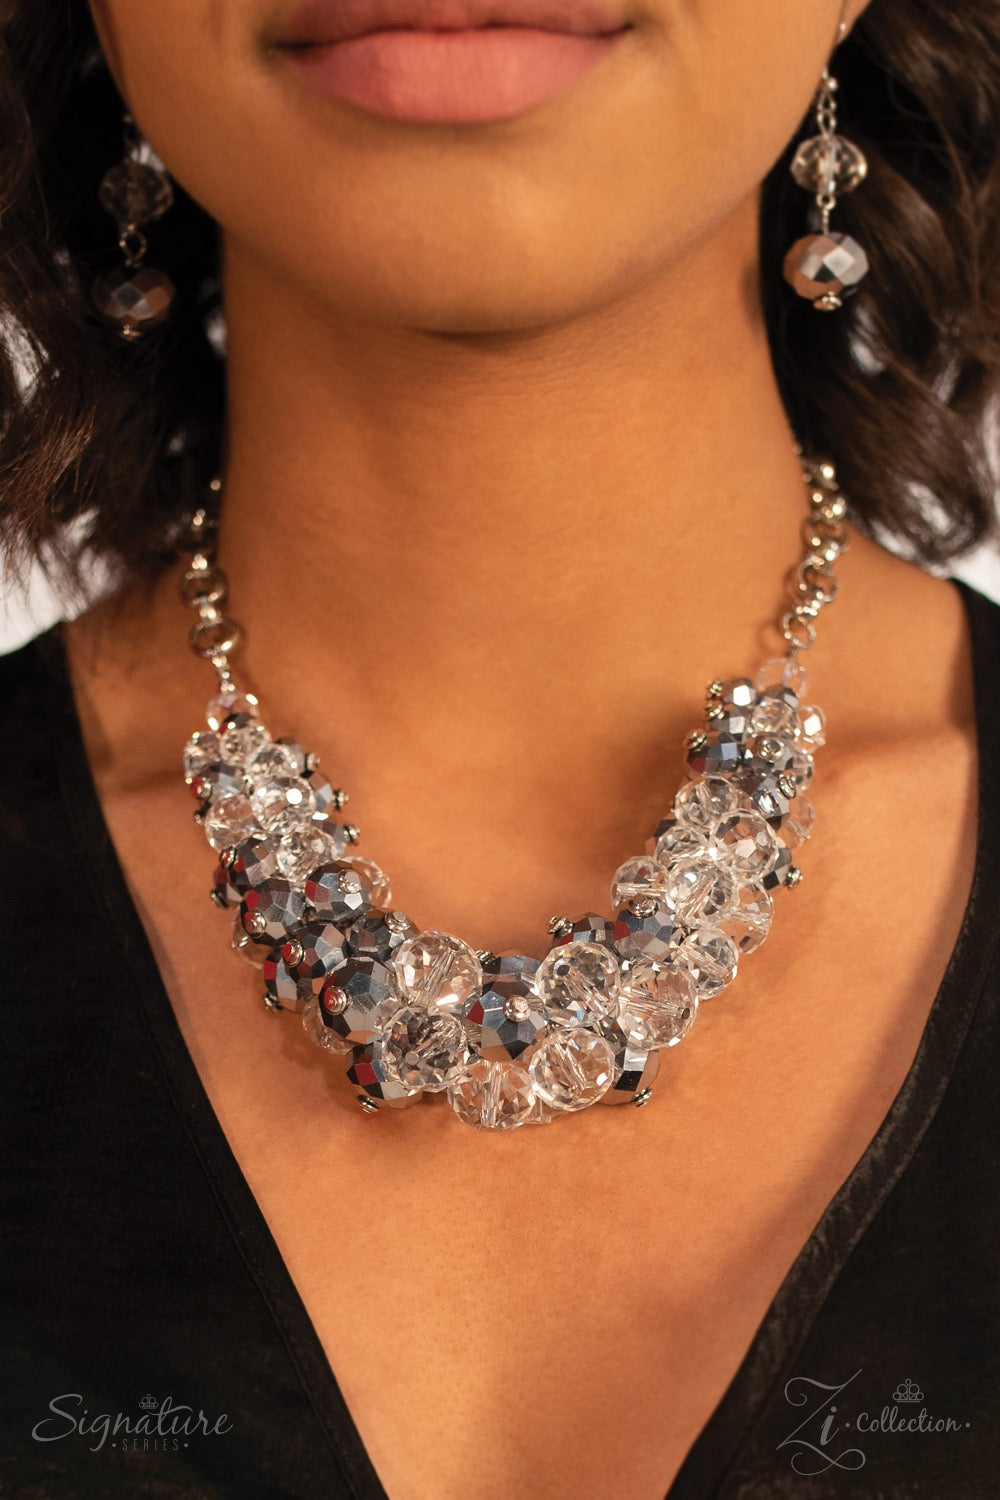 Zi Collection - The Erika Necklace